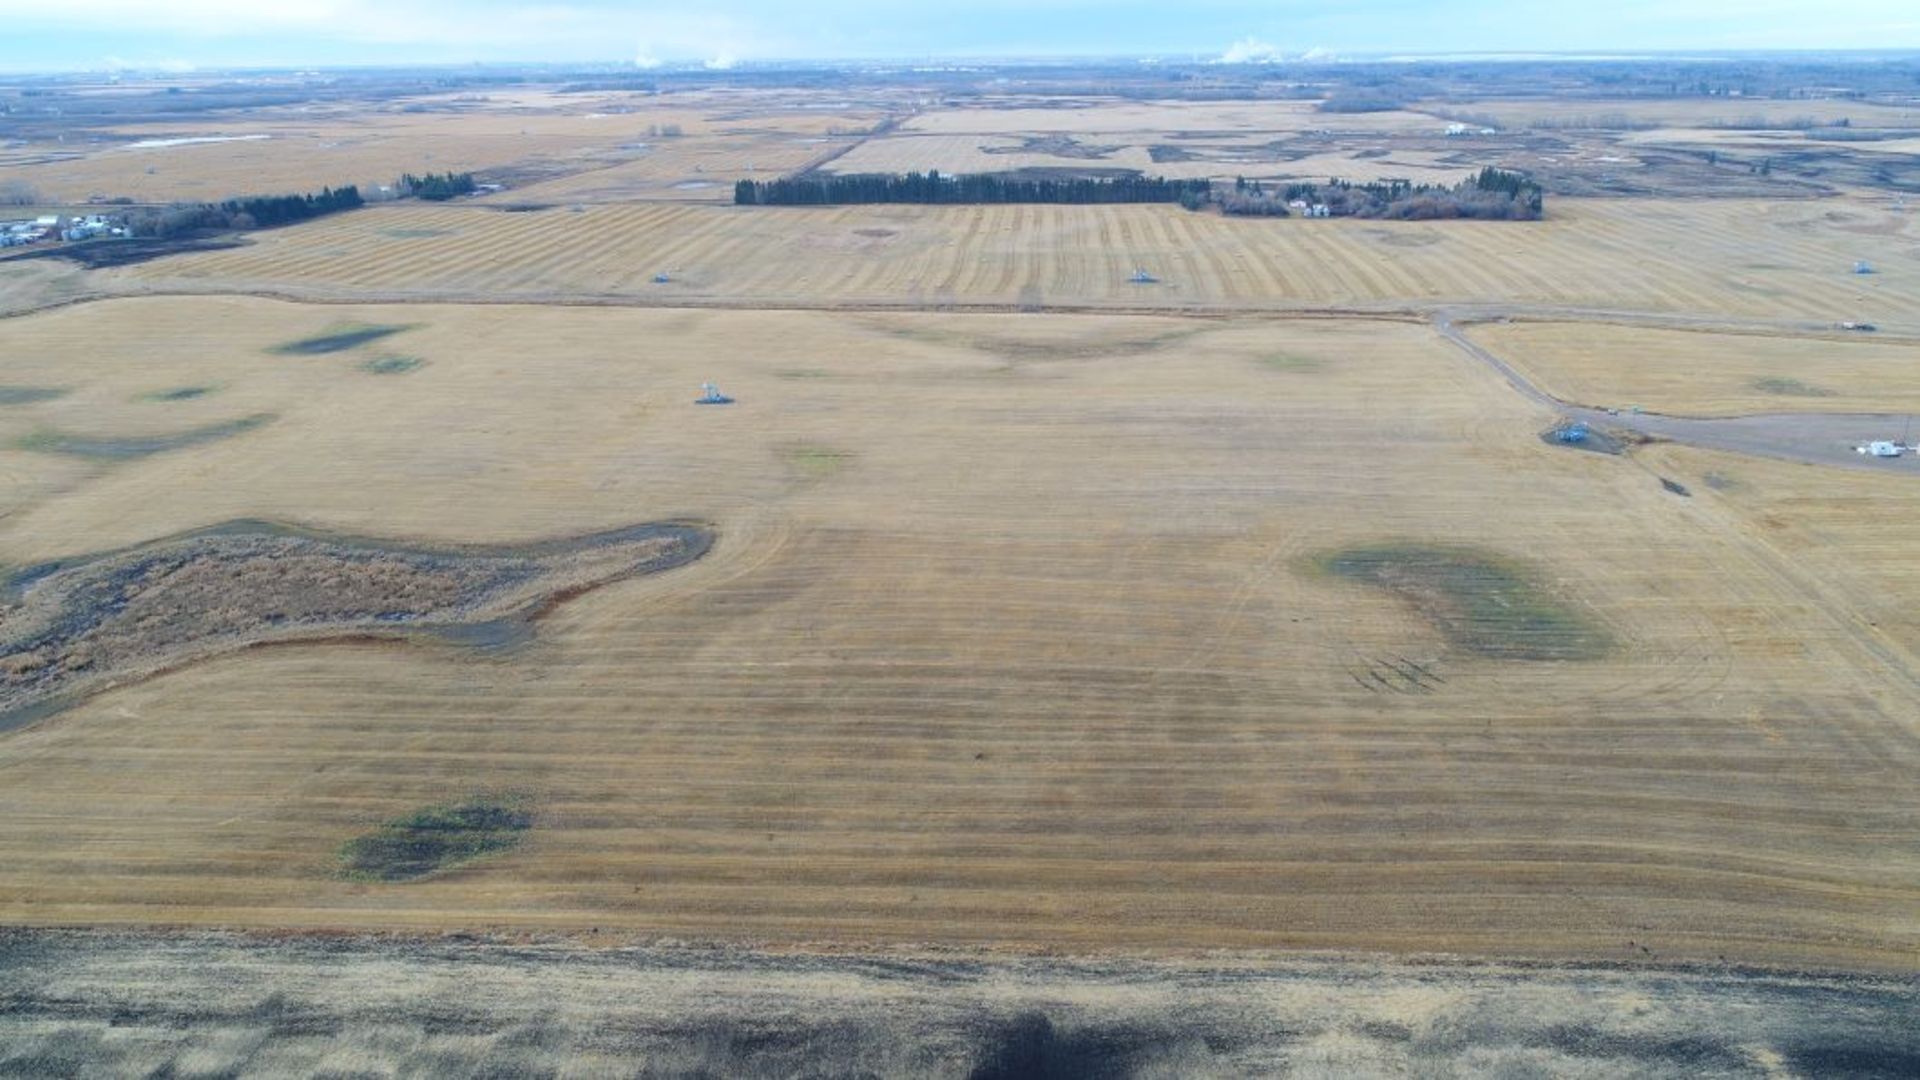 160+/- Total Acres NW 8-56-20-W4, Bruderheim, AB, consisting of Crop Land, Surface Lease & Yard Site - Image 16 of 34